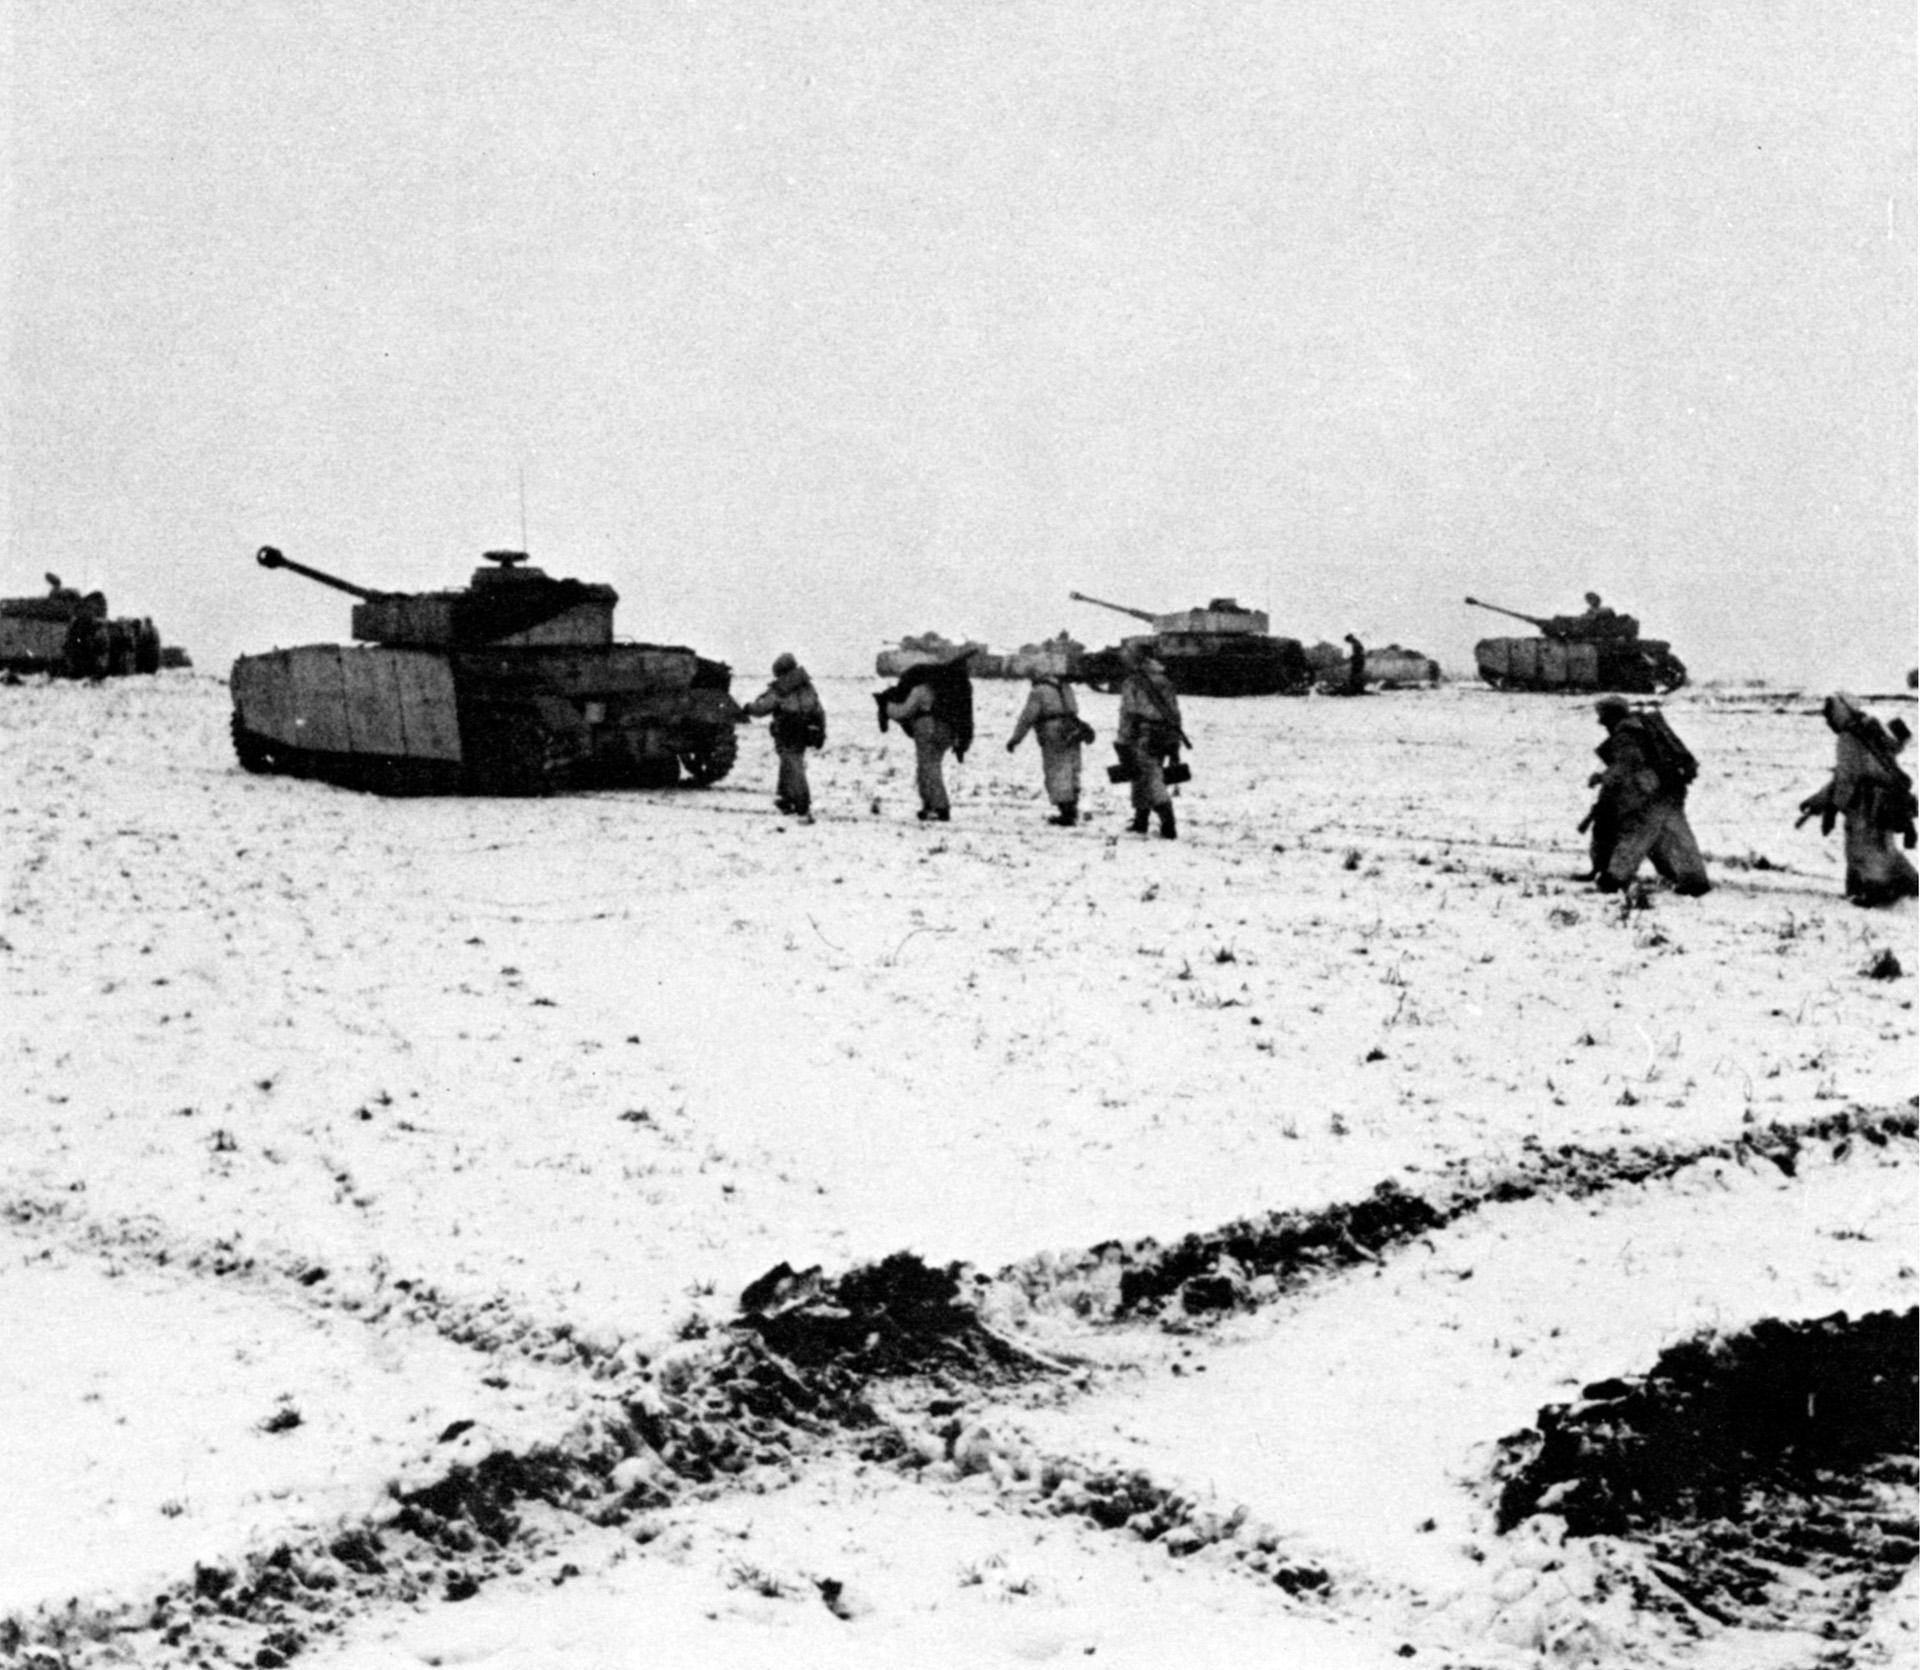 Advancing across a snow-covered Russian steppe, German soldiers clad in white camouflage snowsuits support tanks and self-propelled assault vehicles.